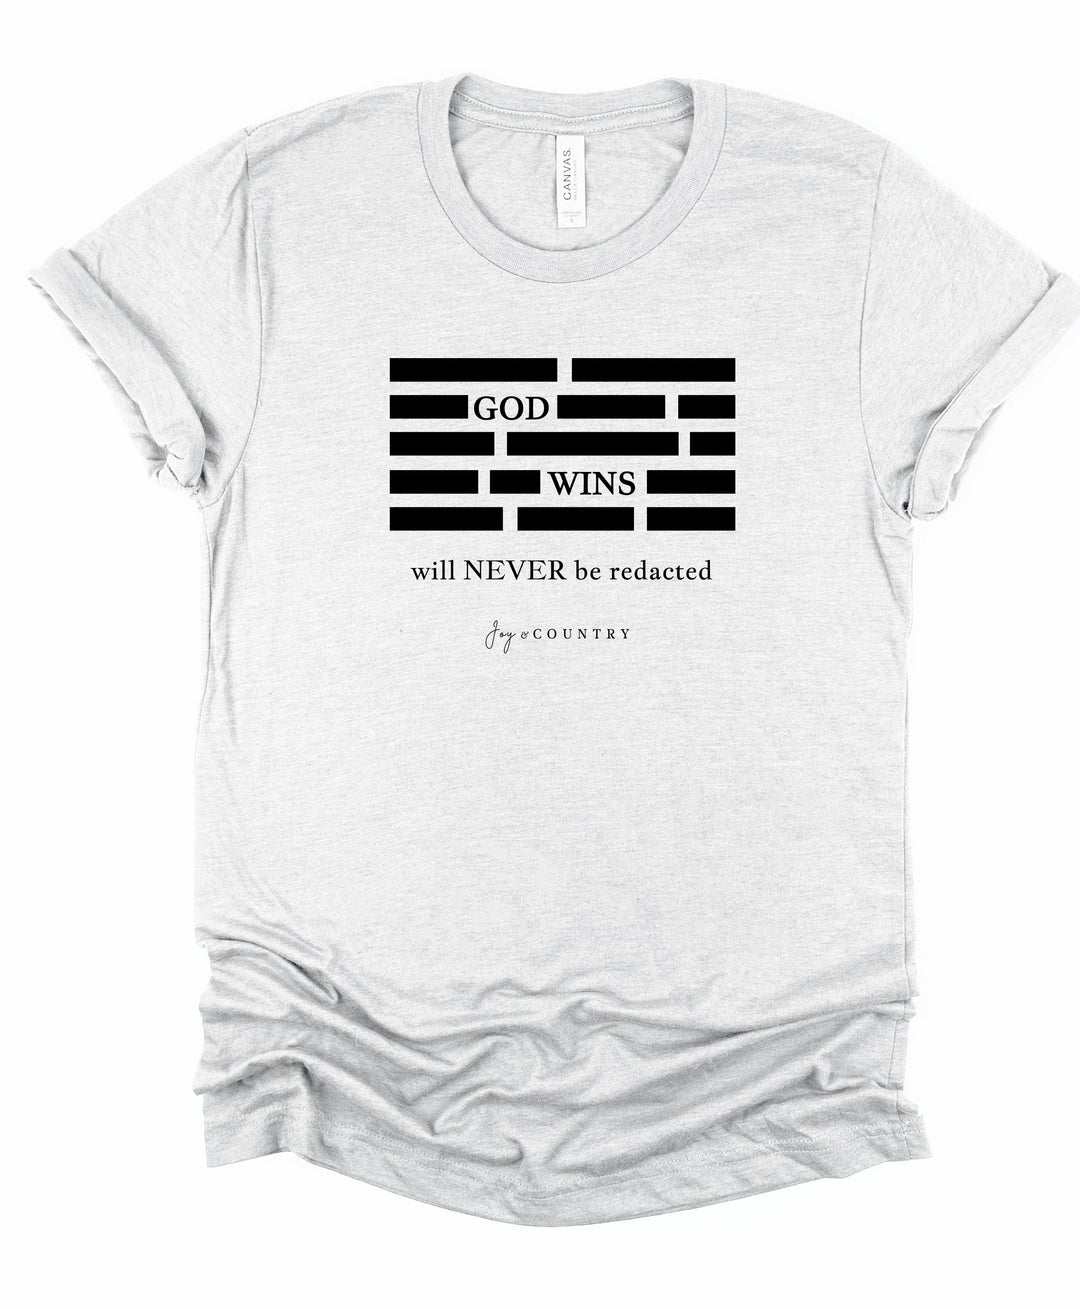 FINAL SALE - SINGLE - God Wins Will Never Be Redacted - Unisex Crew-Neck Tee - Joy & Country